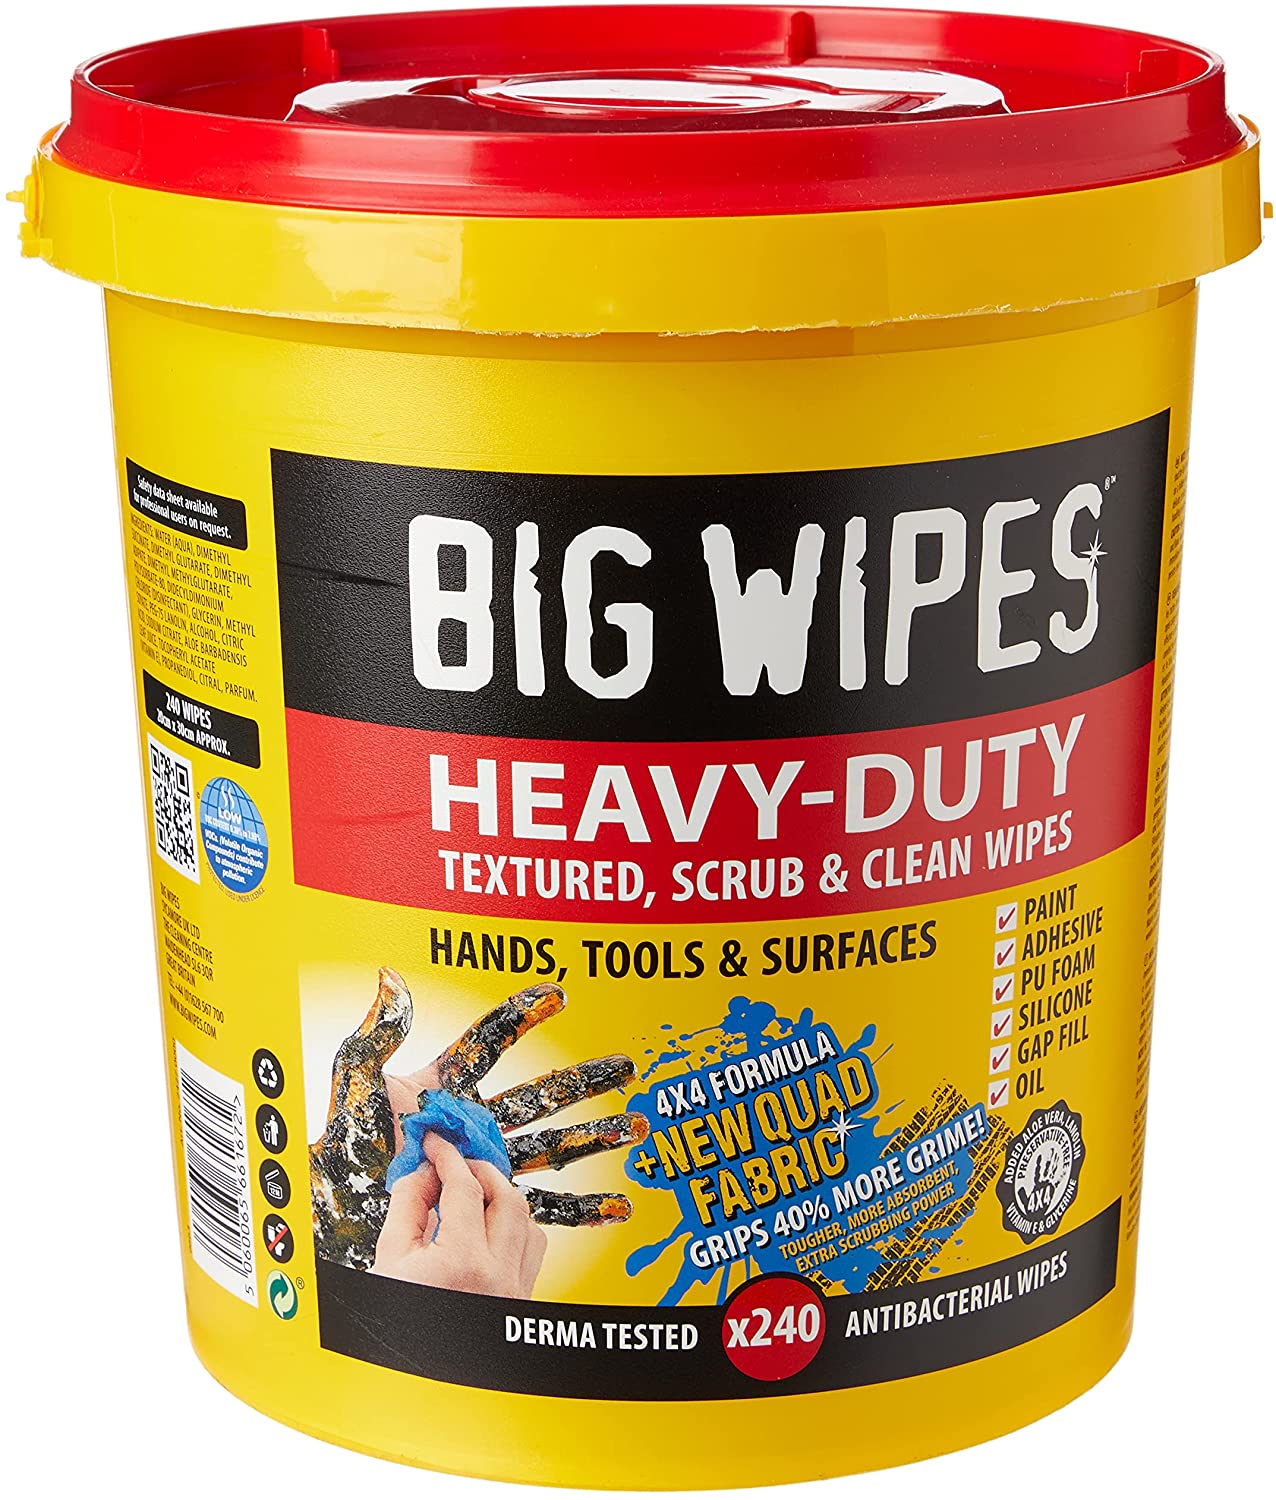 Big Wipes 4x4-inch heavy-duty wipes textured, scrub and clean wipes, 240 pack